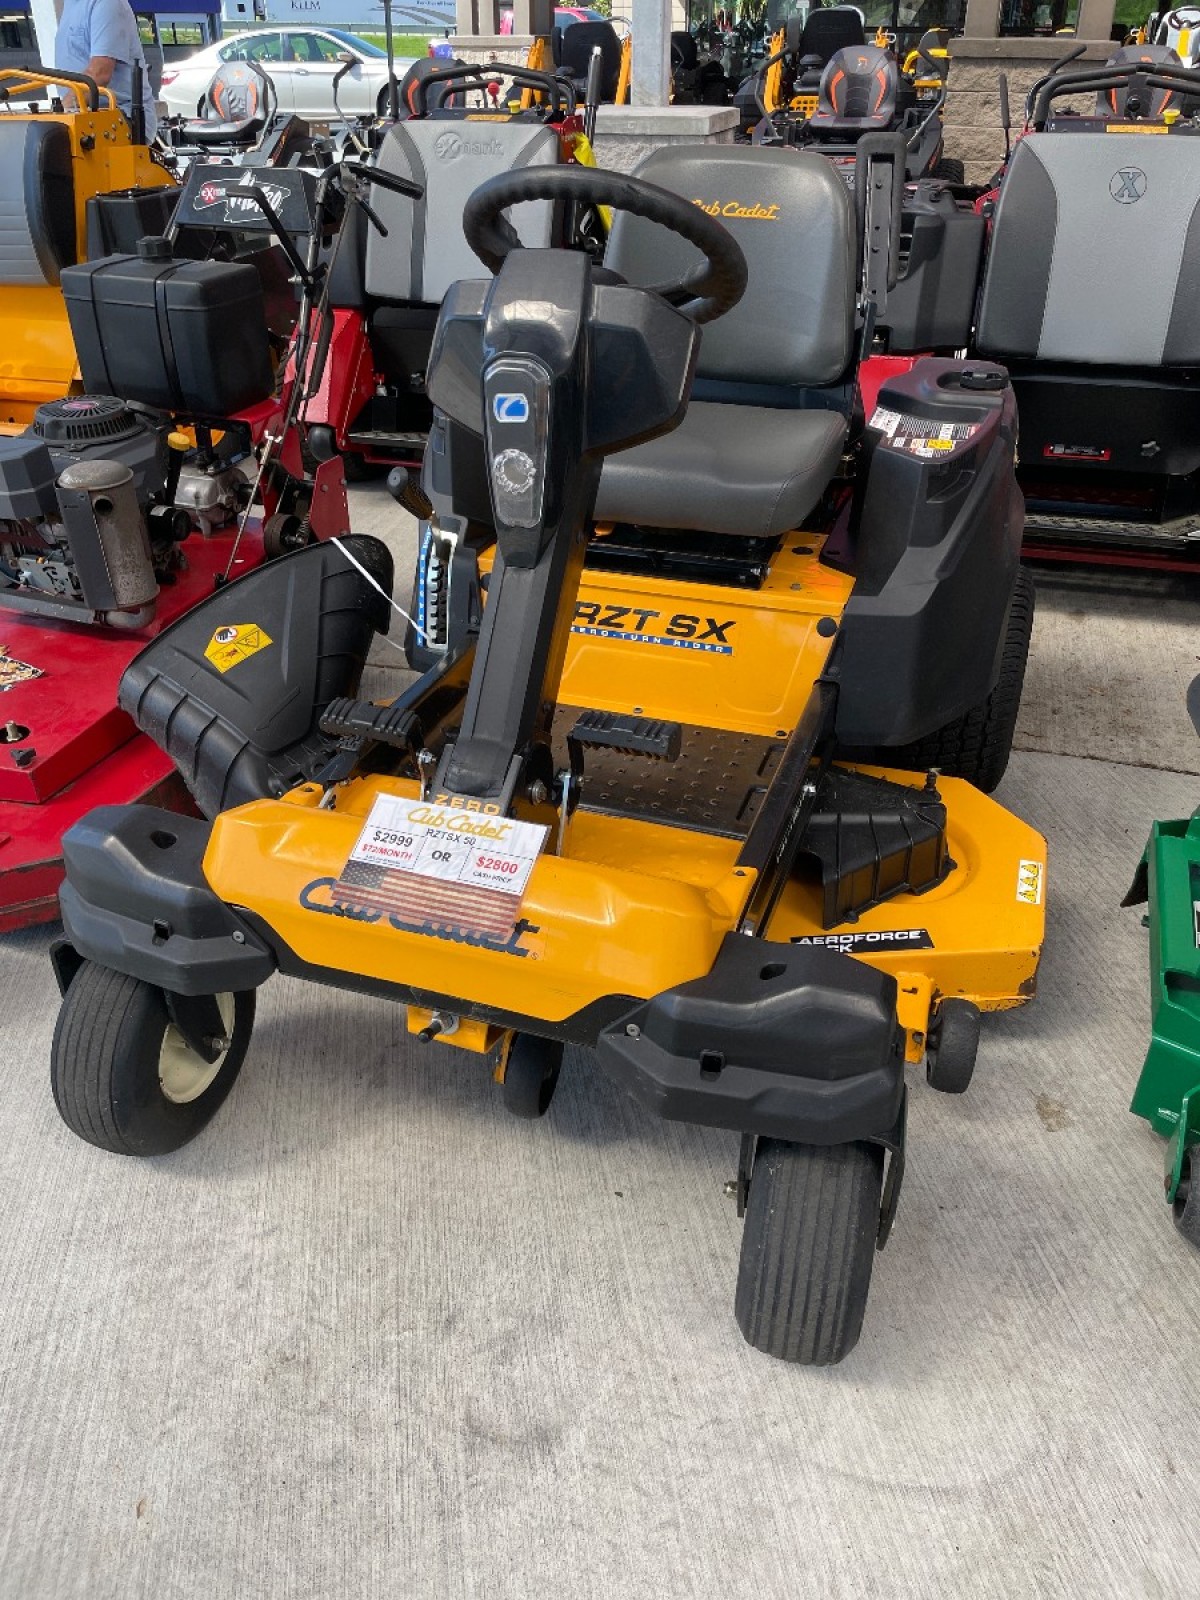 American Pride Power Equipment - Used Pre-Owned Cub Cadet RZT SX50